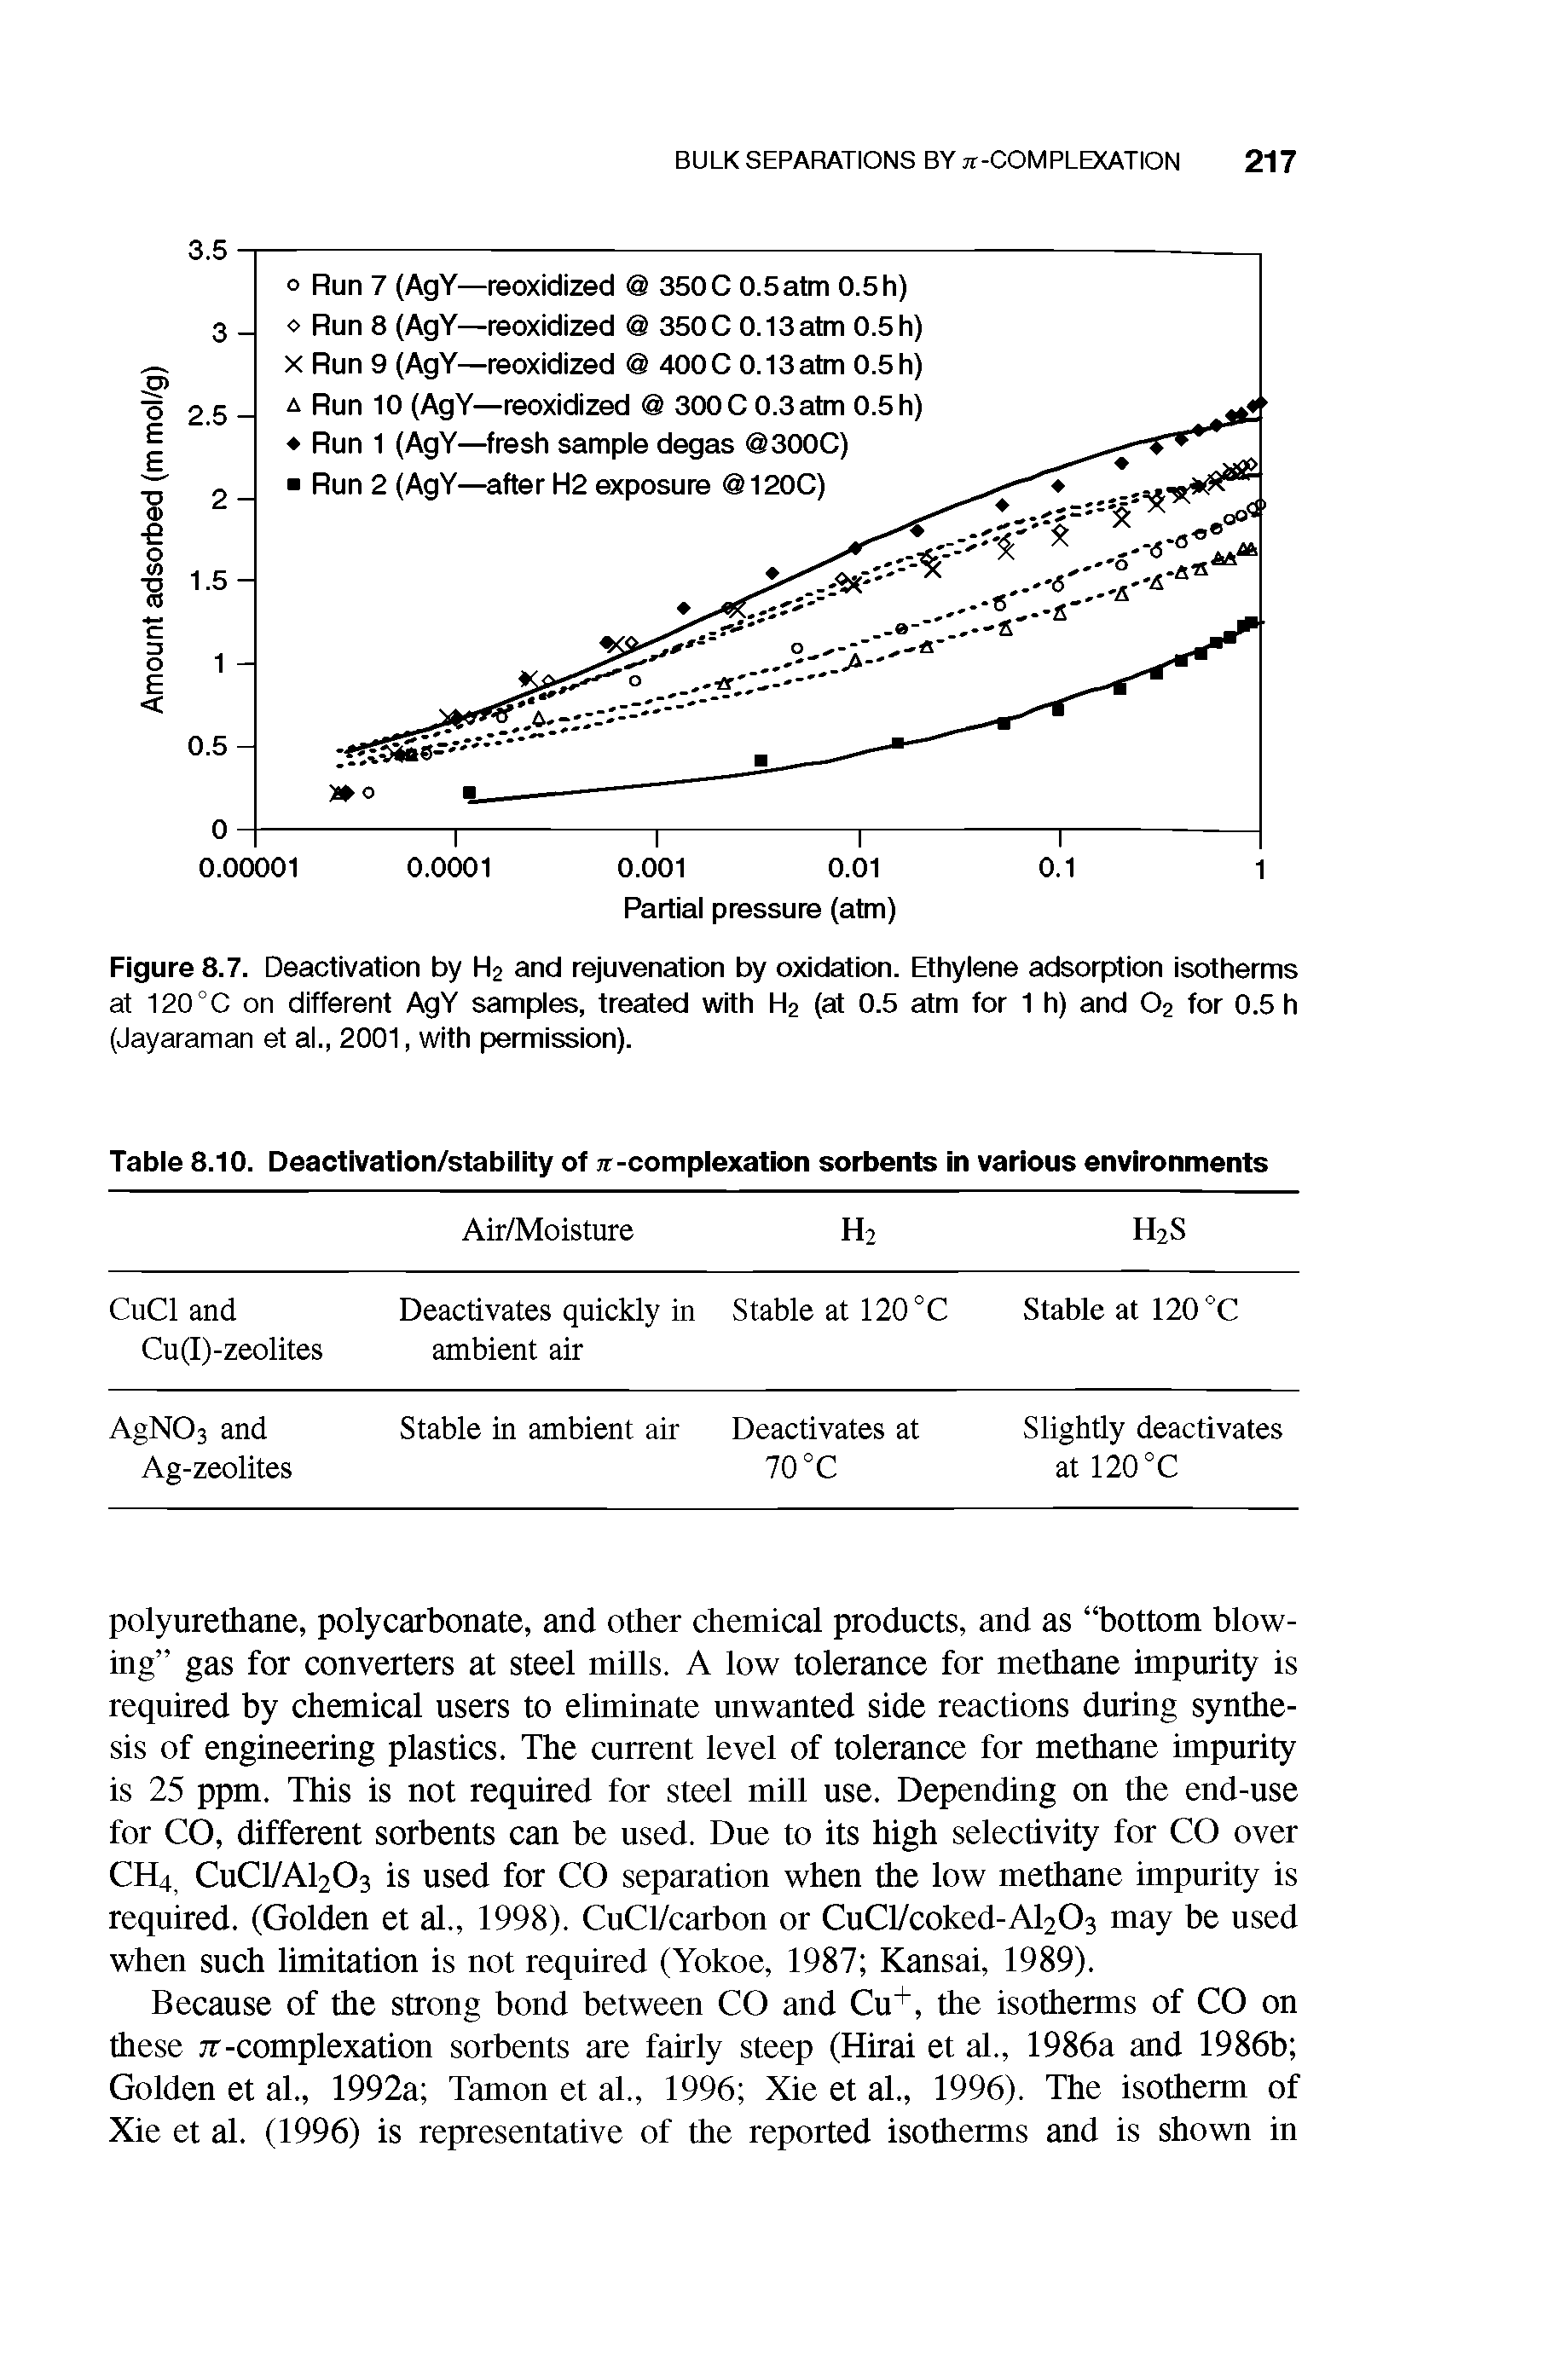 Figure 8.7. Deactivation by Ha and rejuvenation by oxidation. Ethylene adsorption isotherms at 120°C on different AgY samples, treated with Ha (at 0.5 atm for 1 h) and Oa for 0.5 h (Jayaraman et al., 2001, with permission).